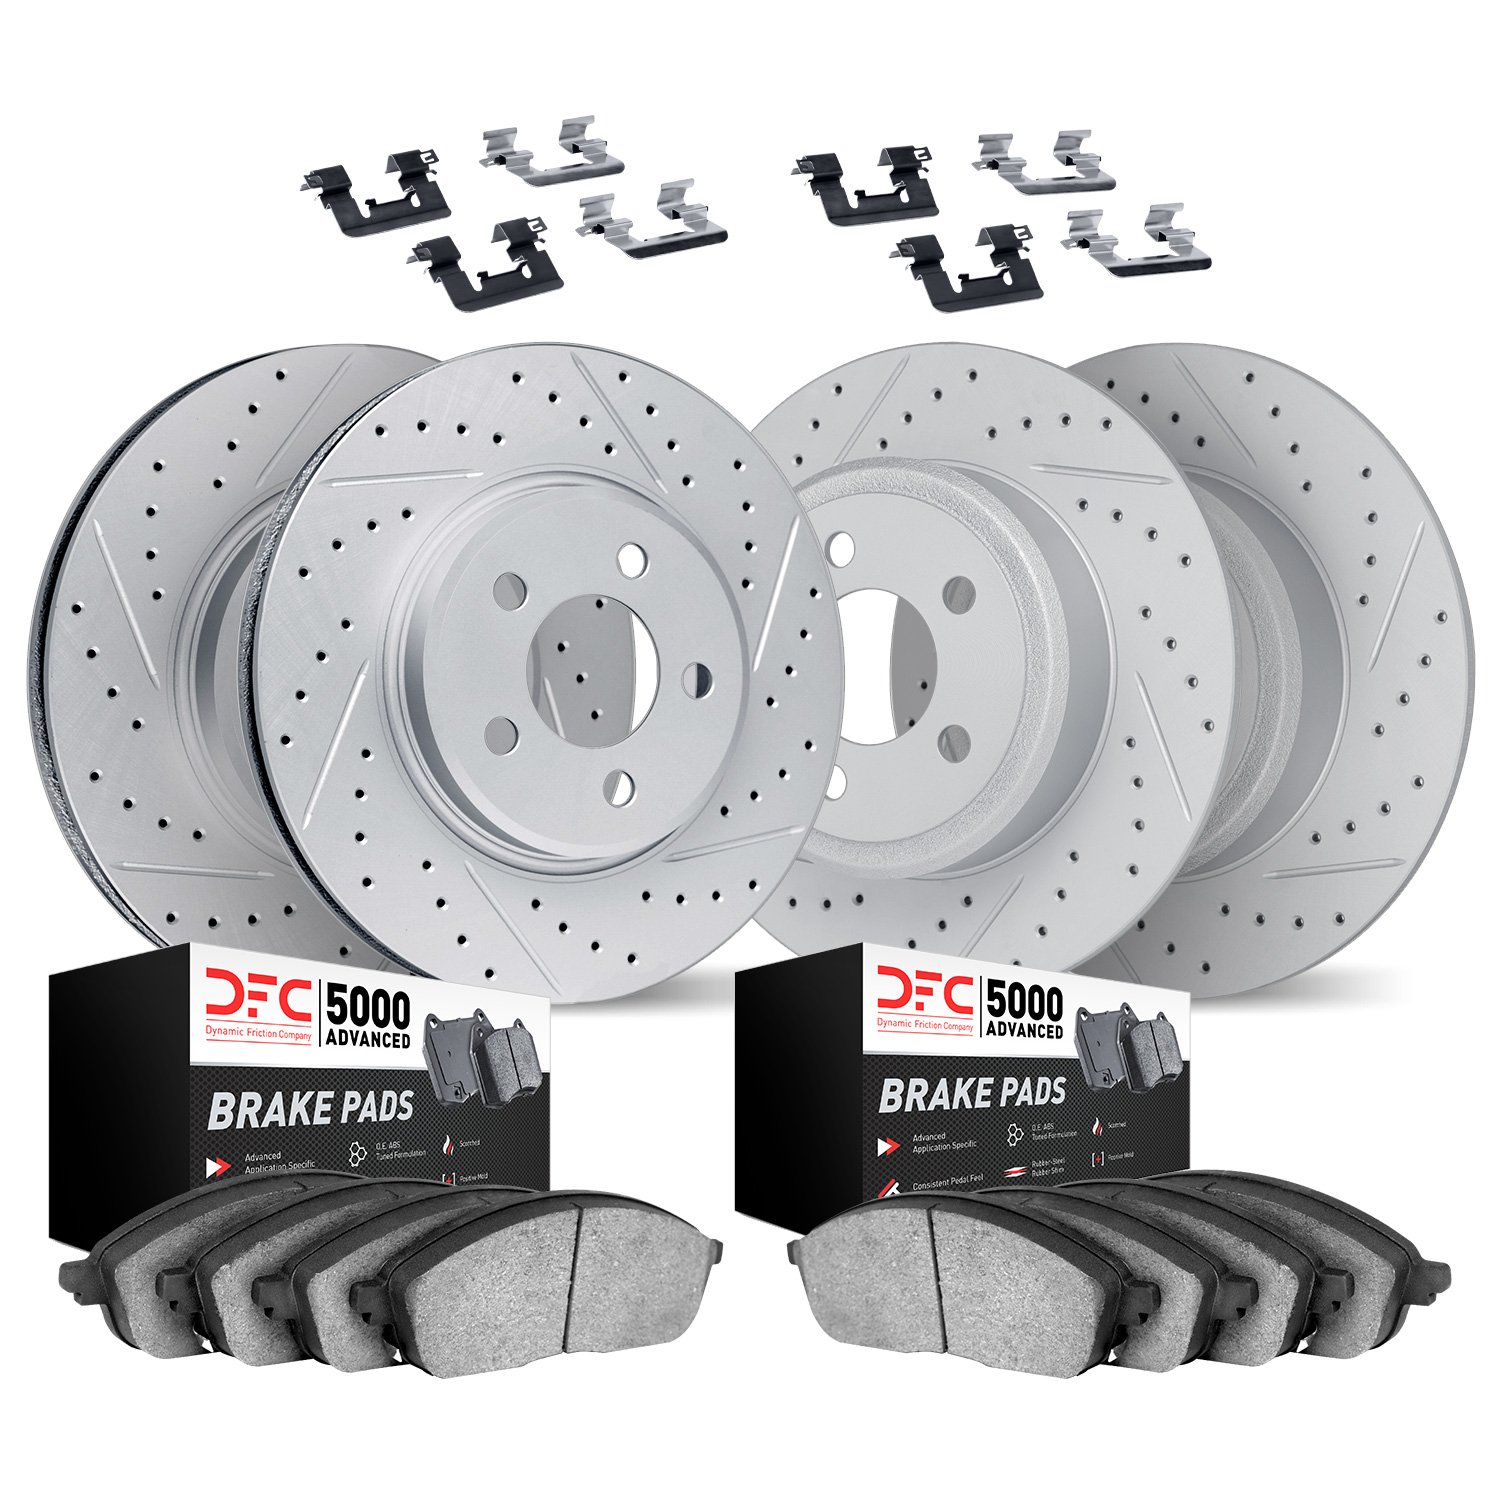 2514-39021 Geoperformance Drilled/Slotted Rotors w/5000 Advanced Brake Pads Kit & Hardware, Fits Select Mopar, Position: Front a